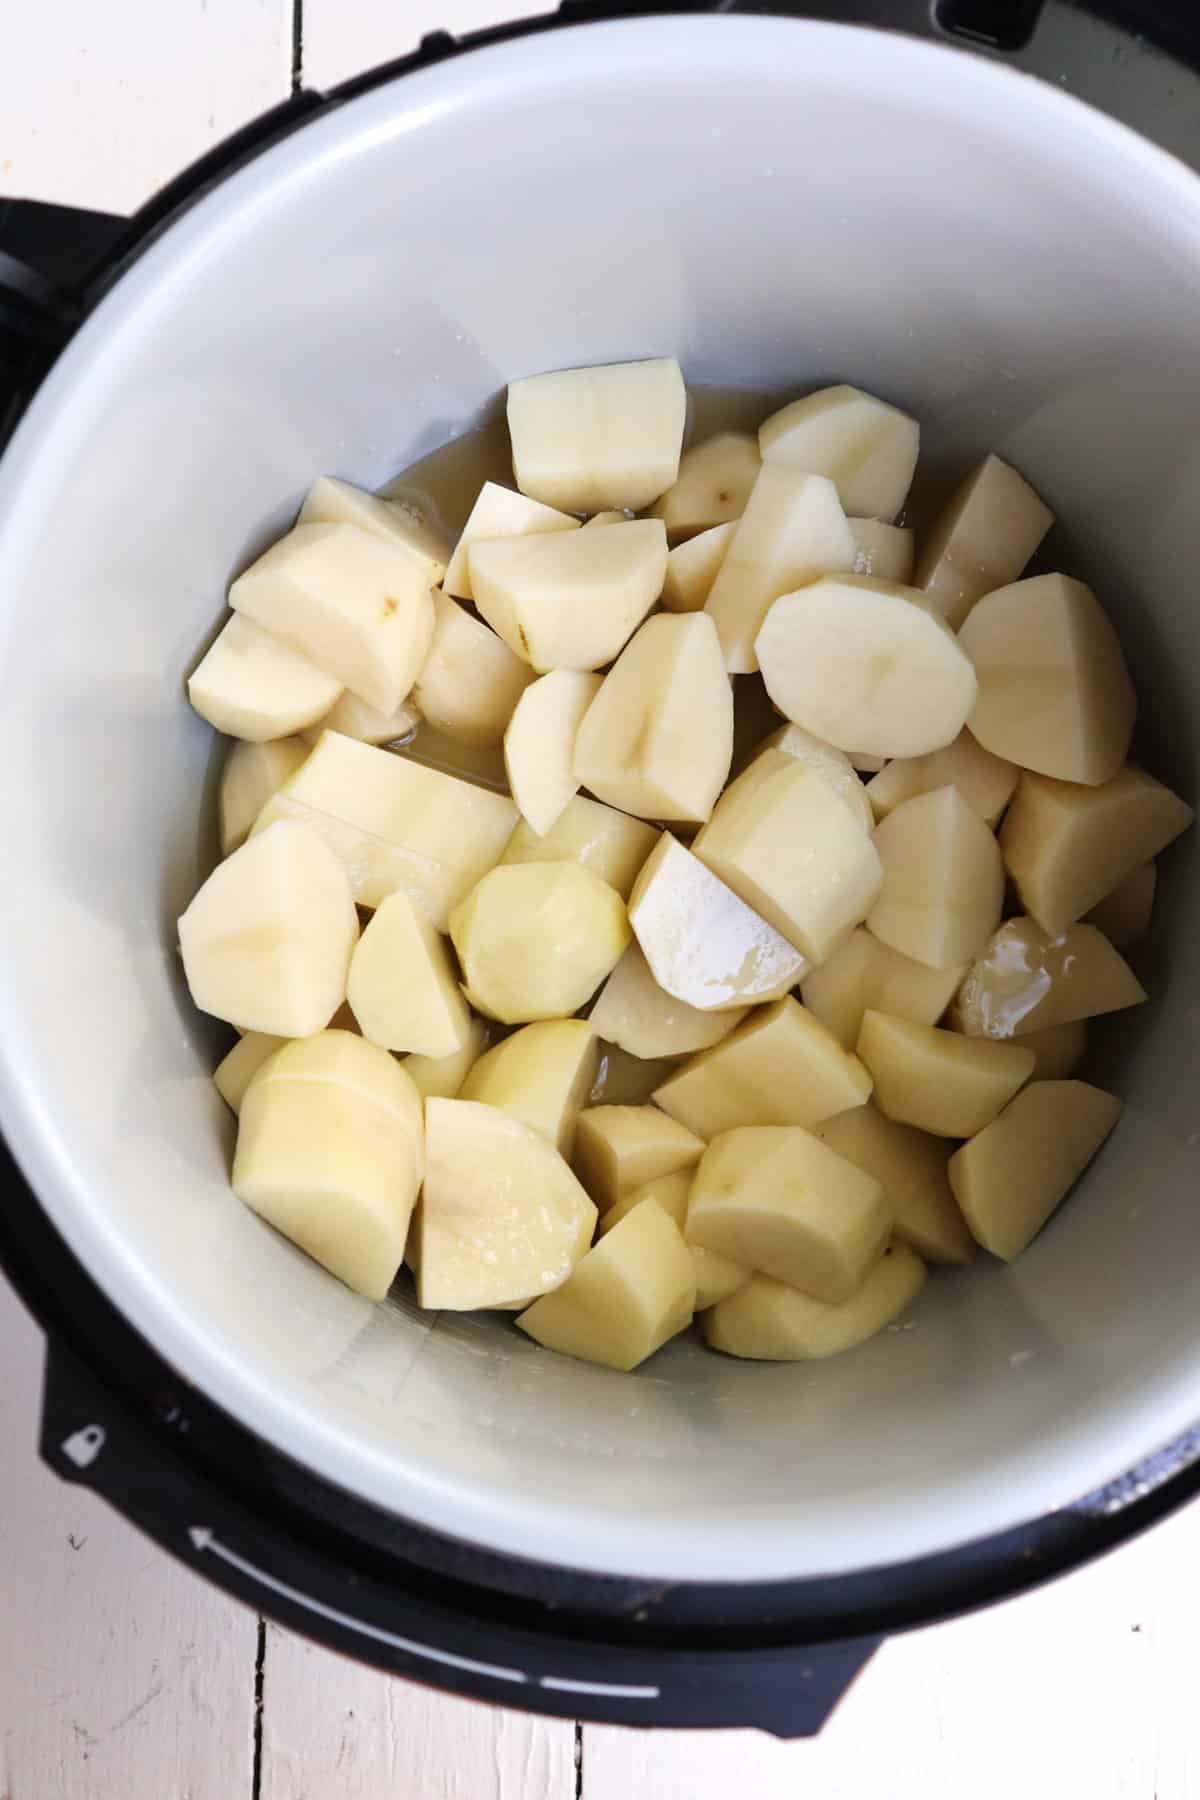 peeled and cut potatoes with stock in instant pot insert.